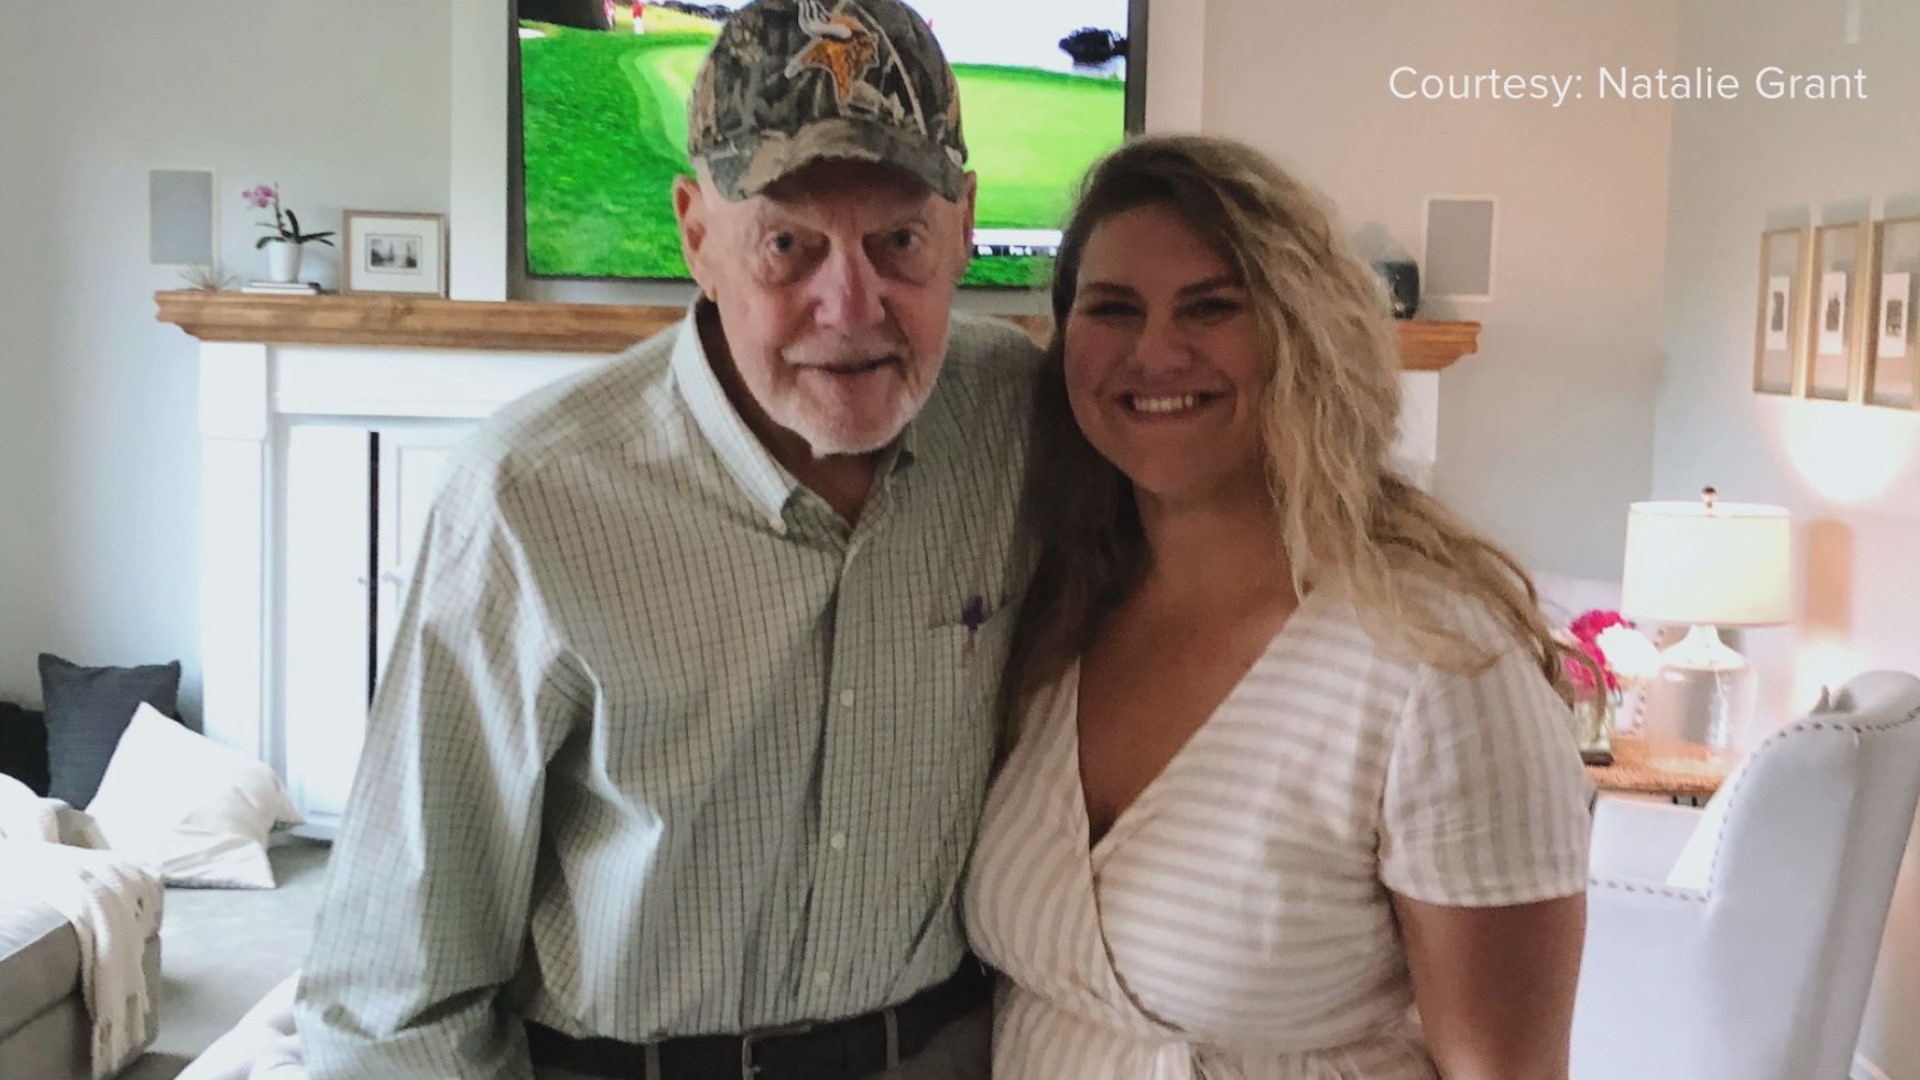 The family of Bud Grant will sound the Gjallarhorn before Sunday's Vikings home opener, and the granddaughter of the legendary coach is sharing memories.